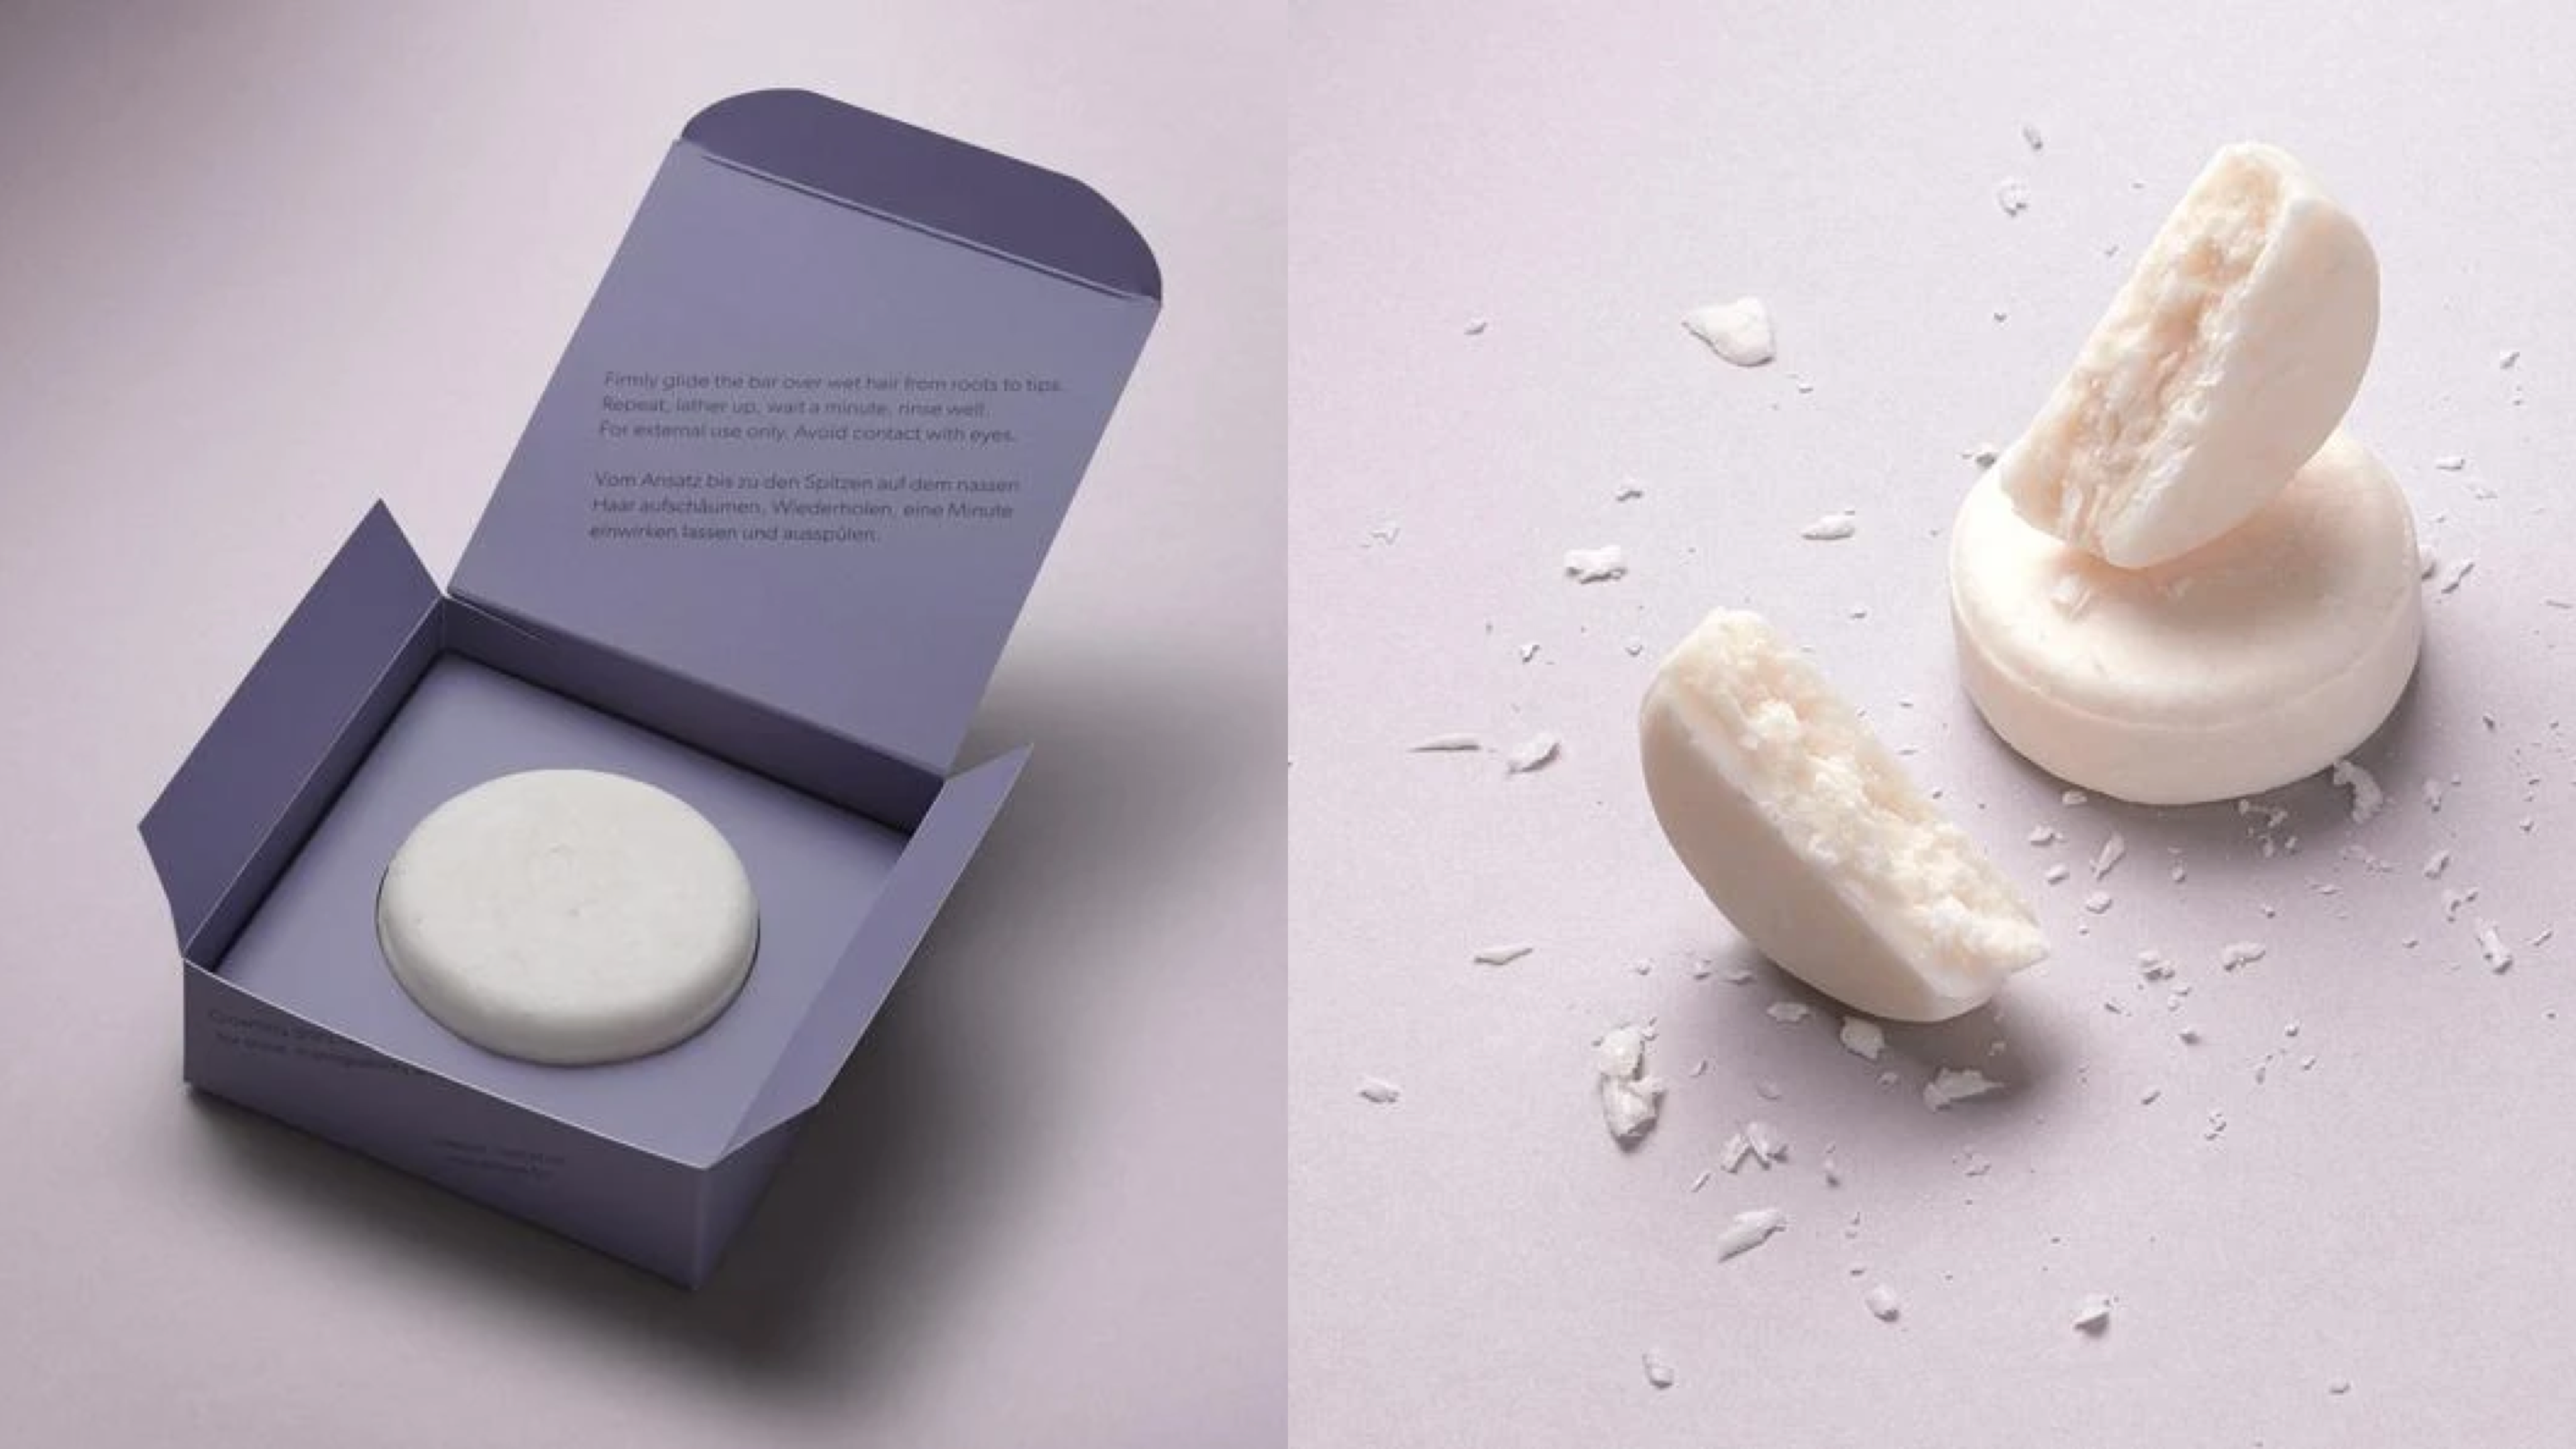 shampoo bar that comes in recyclable packaging